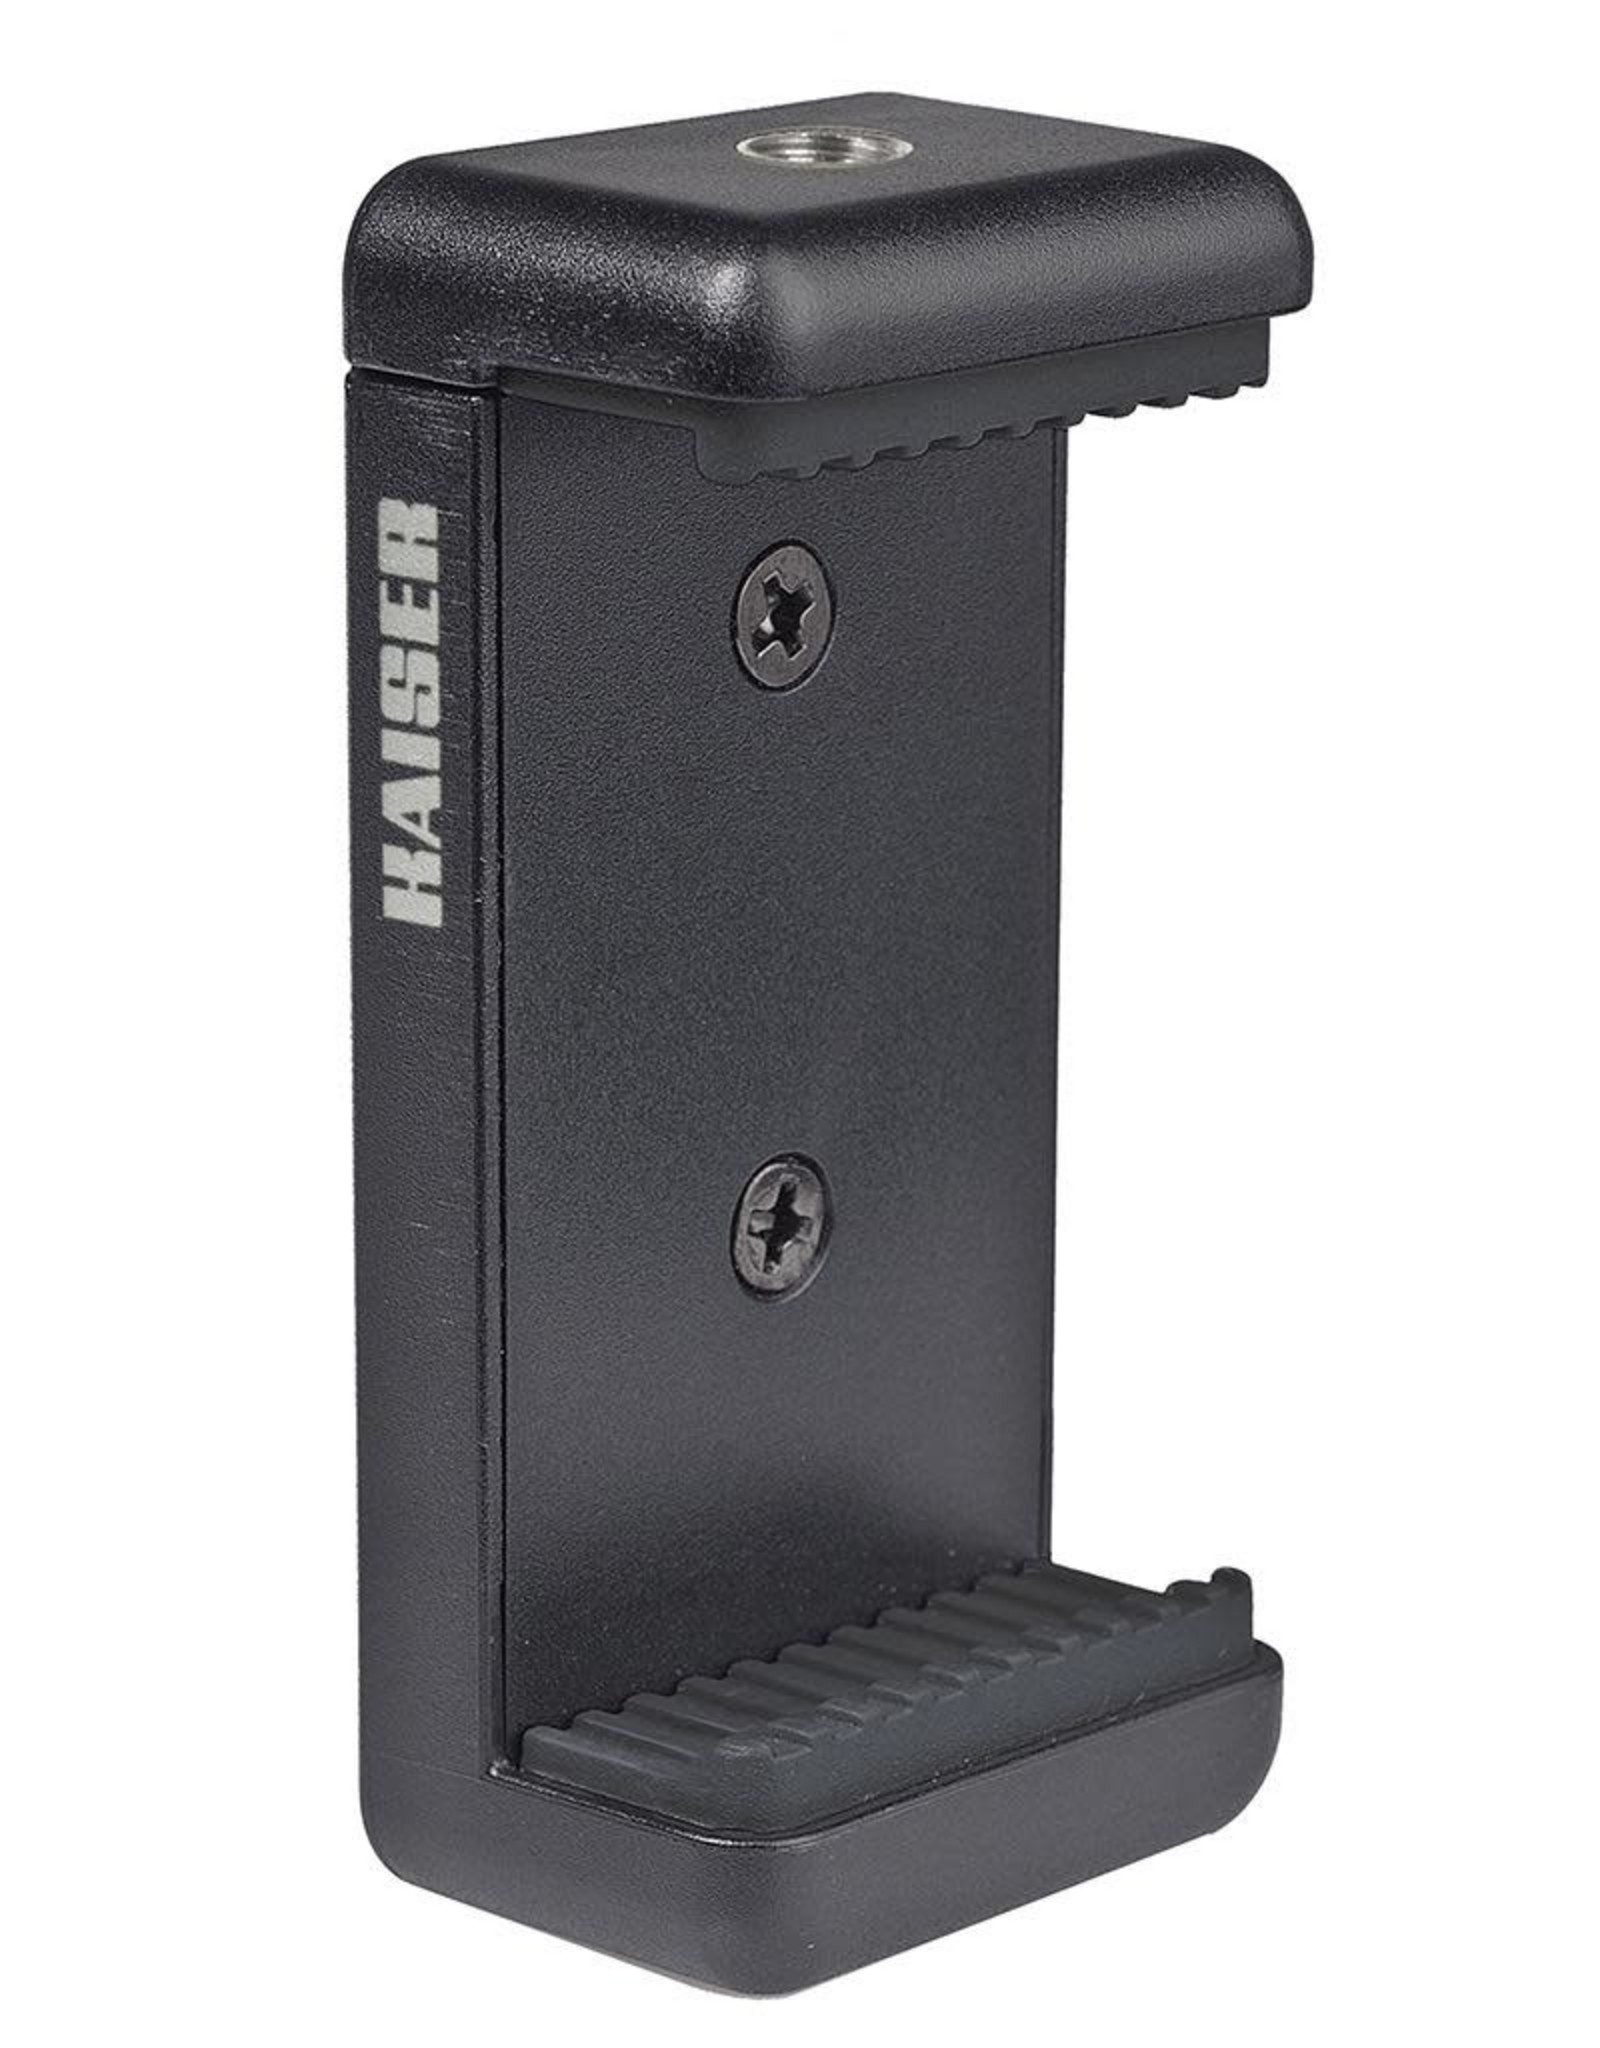 Kaiser Kaiser Smartphone Holder, Clamp span 56-85 mm (2.2 - 3.5 in.), with two tripod threads 1/4"